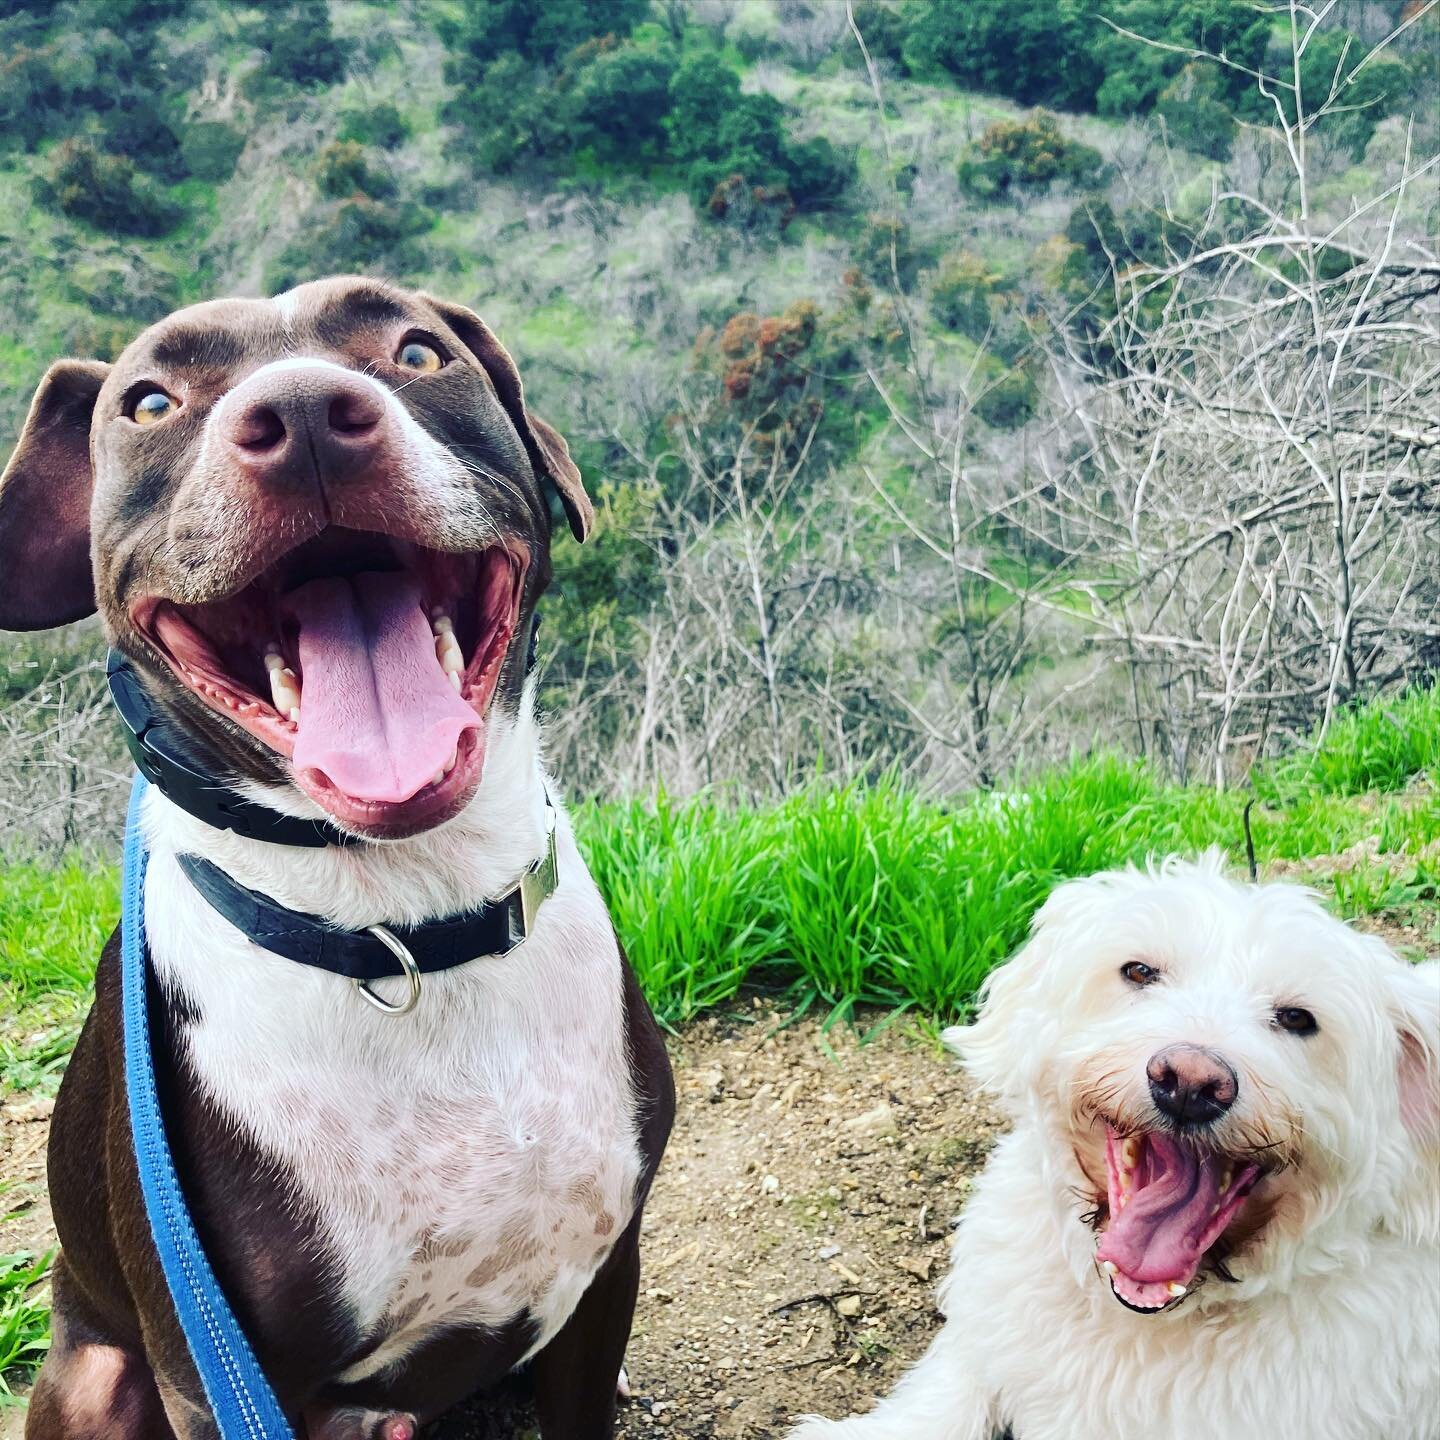 What&rsquo;s a typical week look like here at @barksandrec_la ? Well, here are some highlights 🥰
1. Our new friend Patrick (left) made fast friends with Wonder!! They enjoyed their hike together in Wonder&rsquo;s neighborhood. Wonder is showing Patr